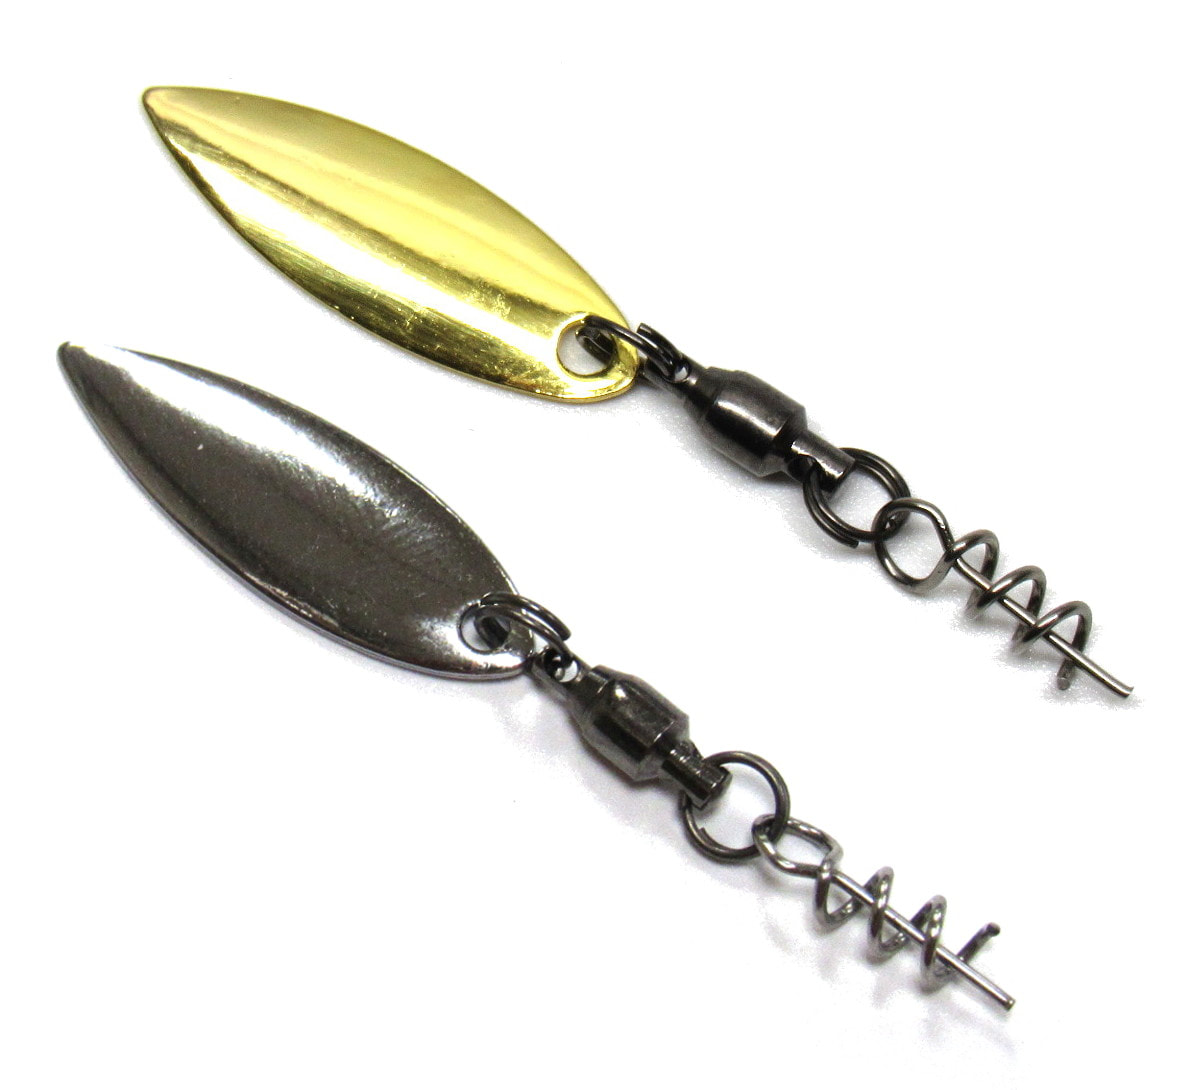  Wild life Spring Pin Twist Lock Tail Spinners